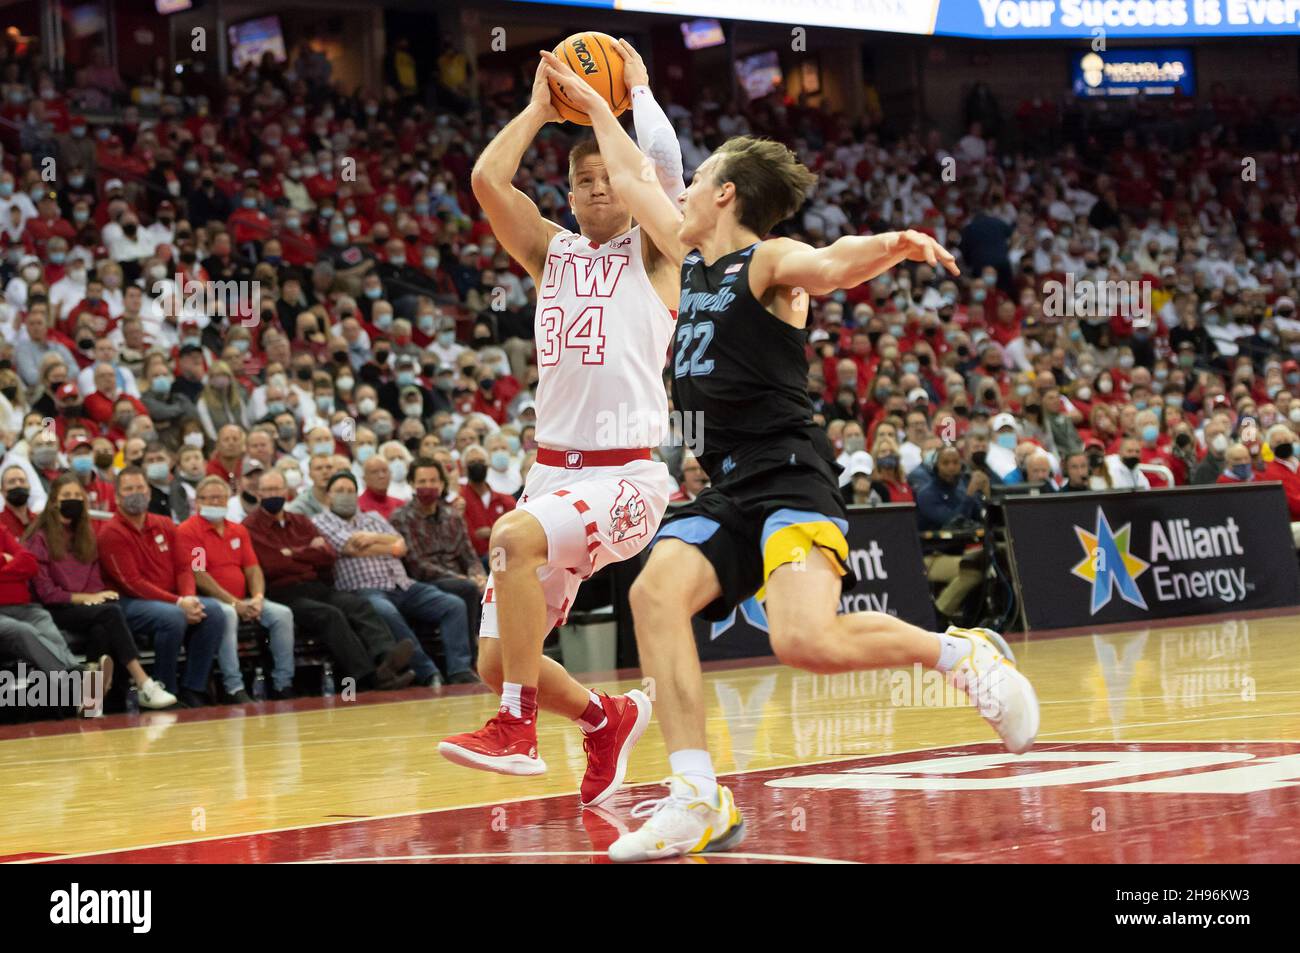 Madison, WI, USA. 4th Dec, 2021. Wisconsin Badgers guard Brad Davison #34 drives to basket against Marquette Golden Eagles guard Tyler Kolek #22 during NCAA basketball game between the Marquette Golden Eagles and the Wisconsin Badgers at Kohl Center in Madison, WI. Wisconsin defeated Marquette 89-76. Kirsten Schmitt/CSM/Alamy Live News Stock Photo